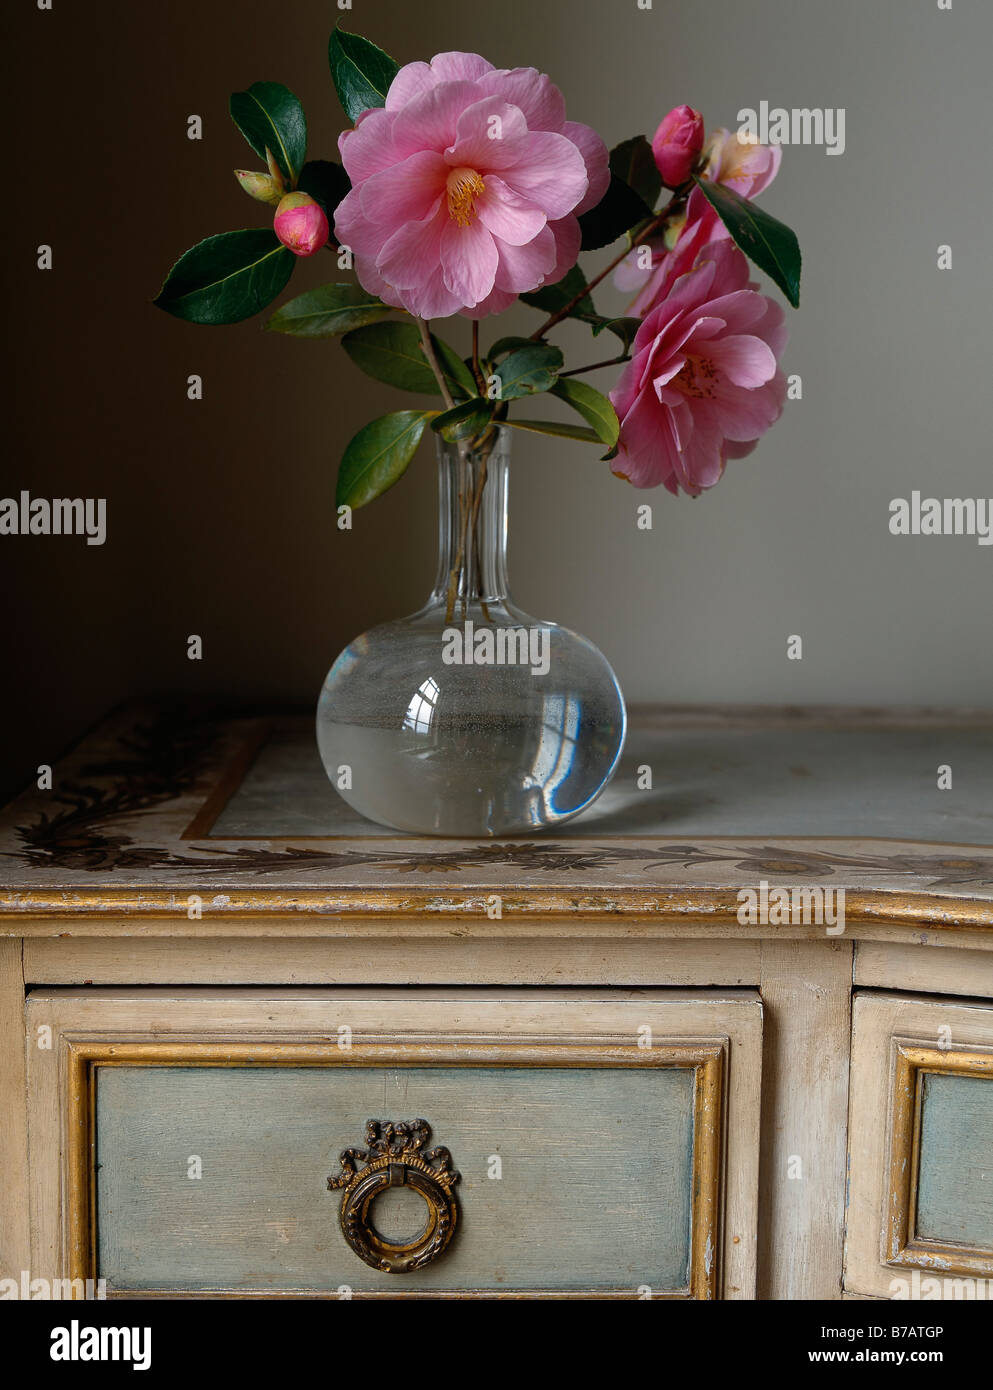 Still life of pink camellia flowers in a glass vase, on an antique desk Stock Photo